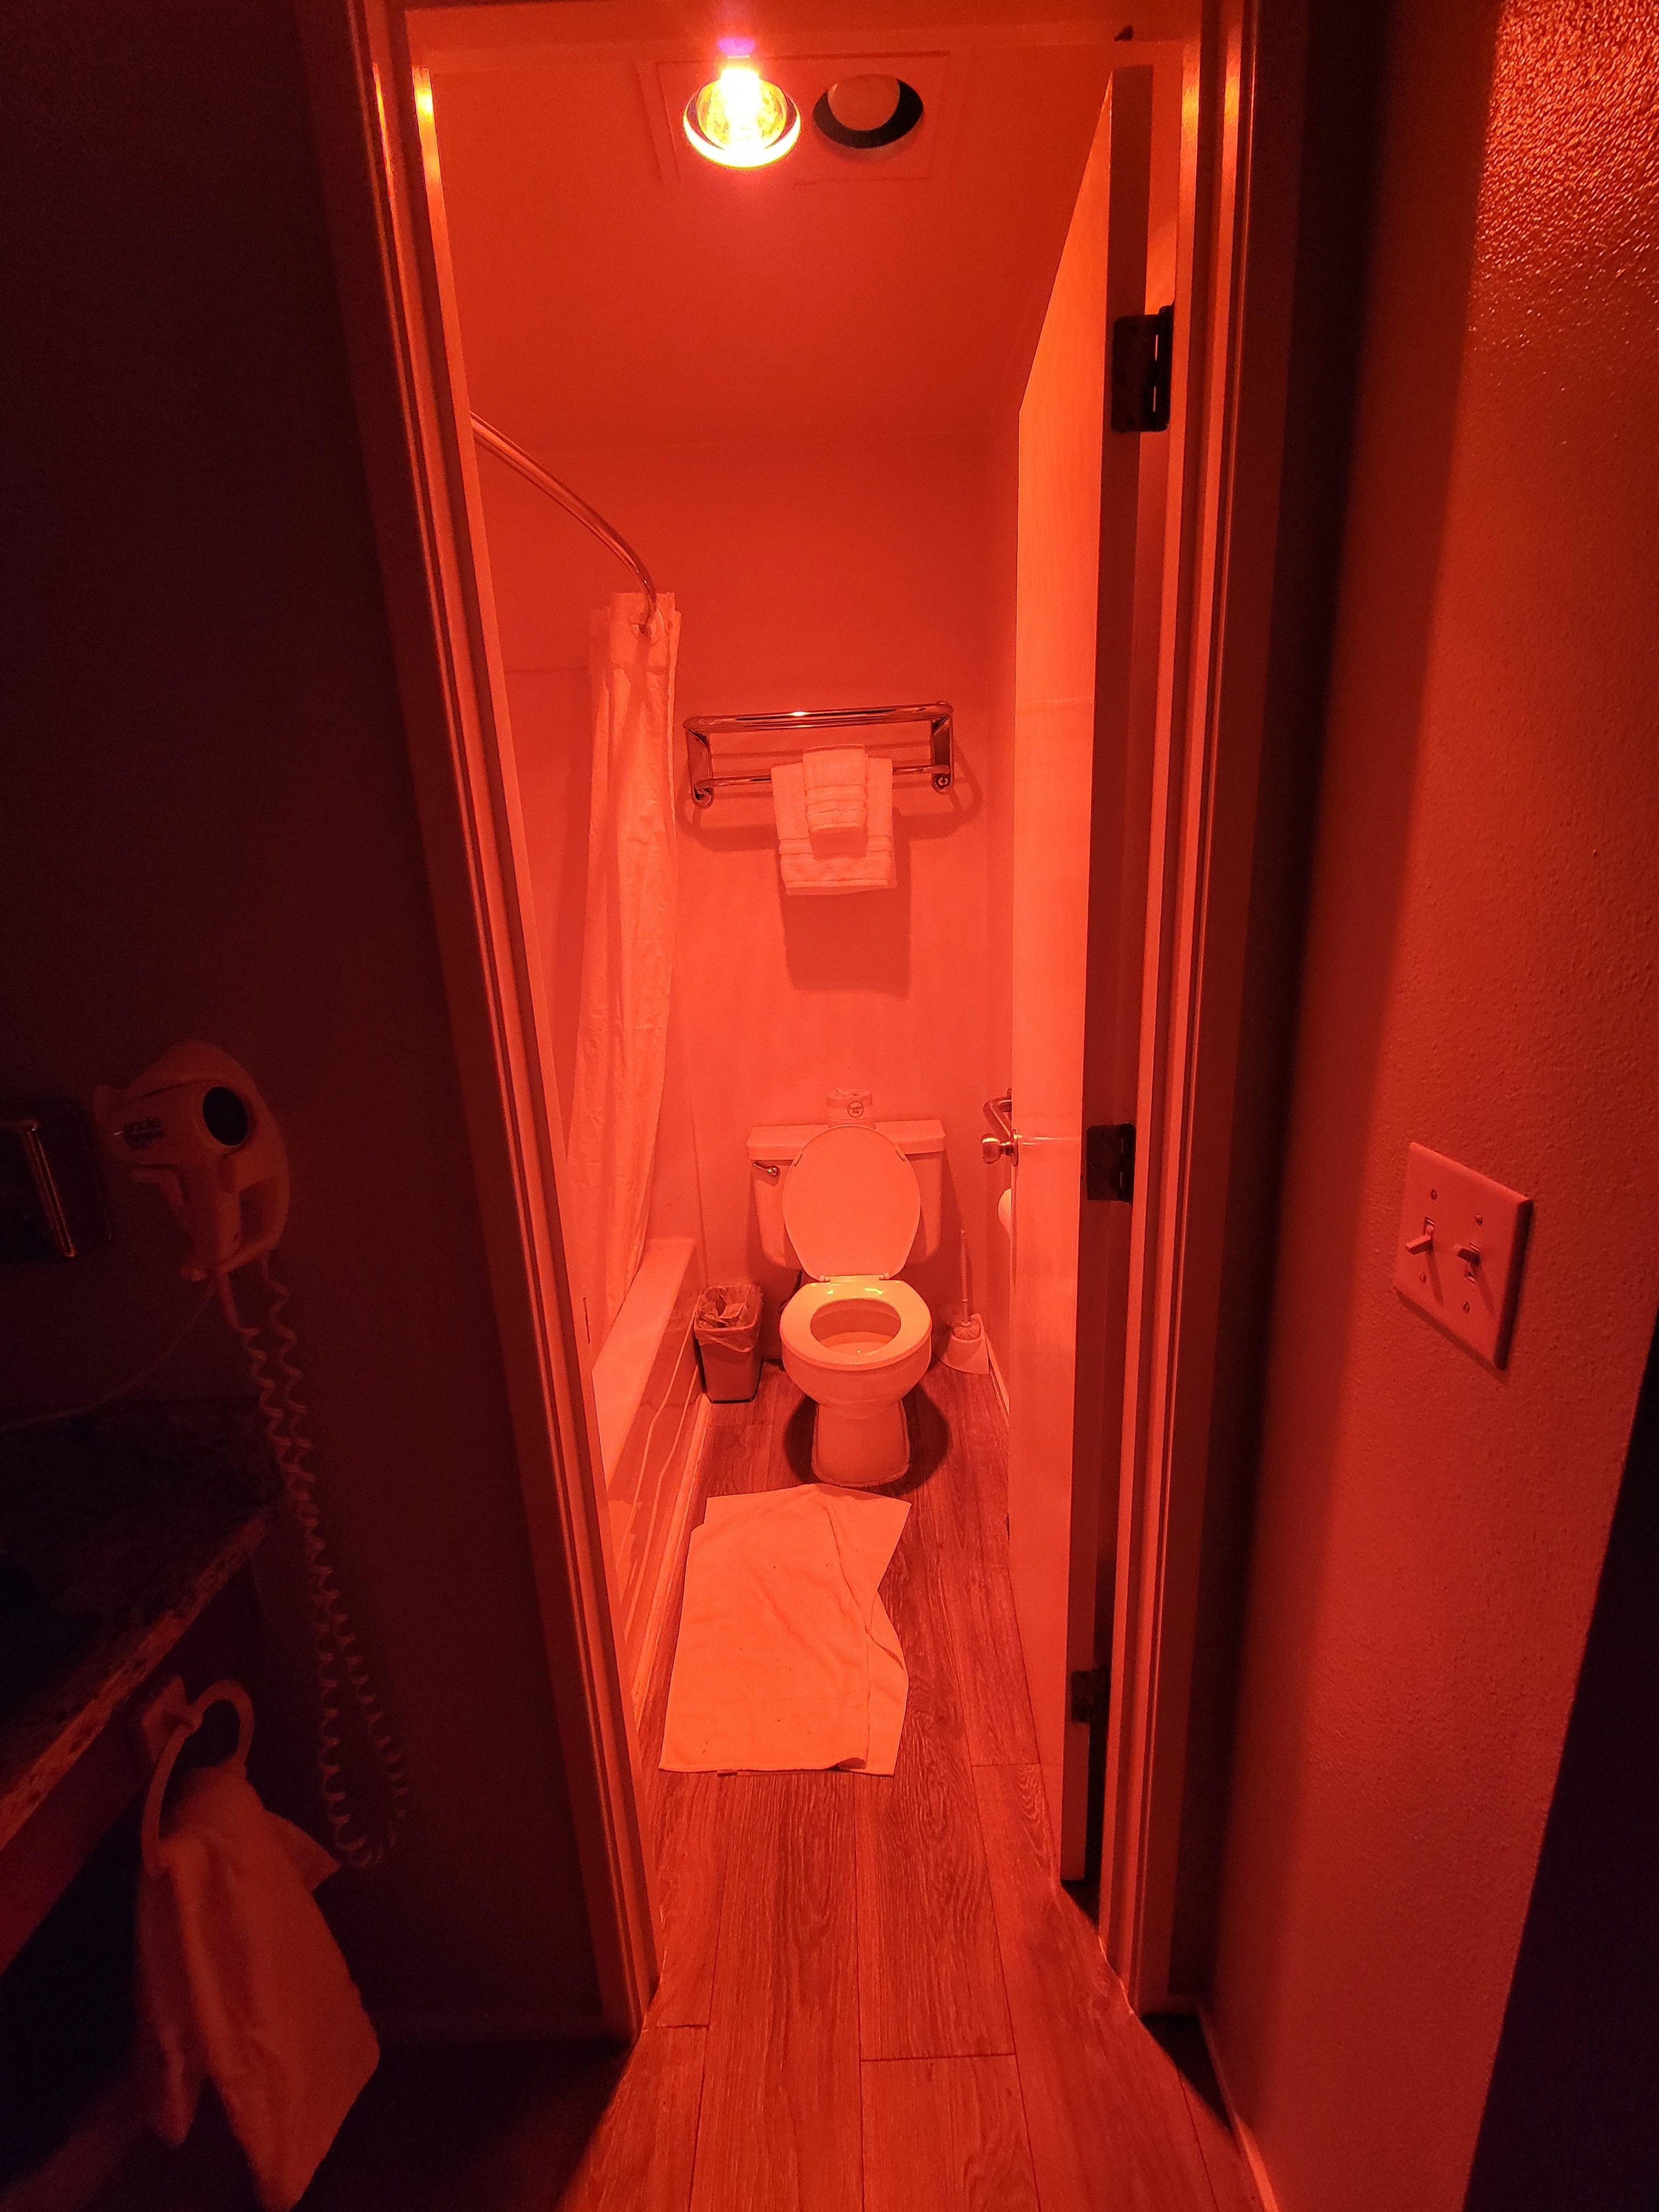 A bathroom lit up with red light